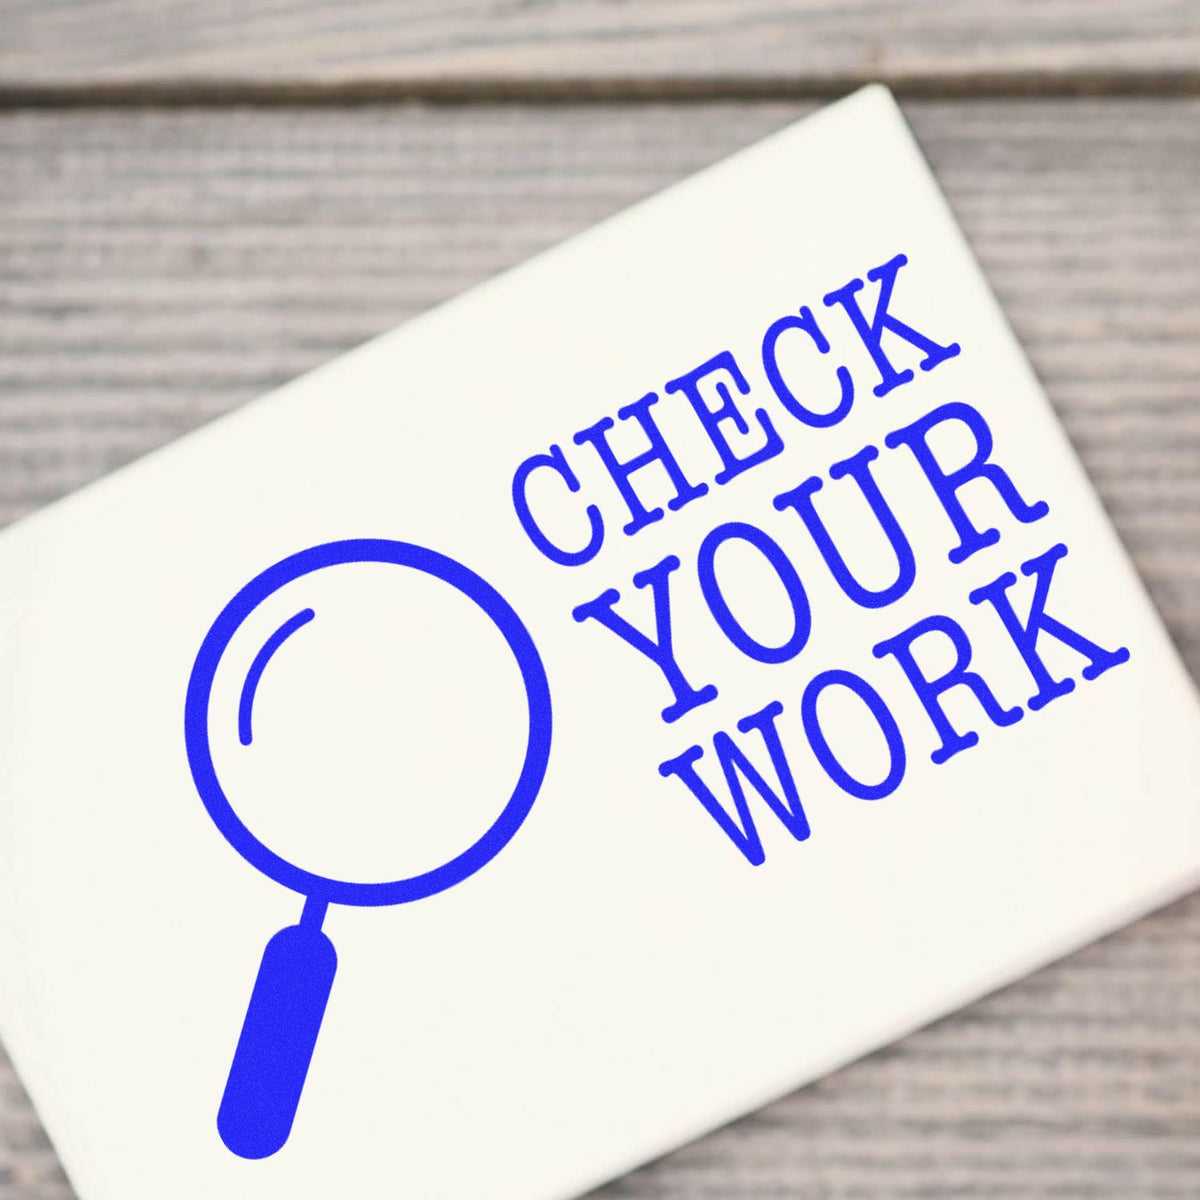 Large Self-Inking Check Your Work Stamp In Use Photo